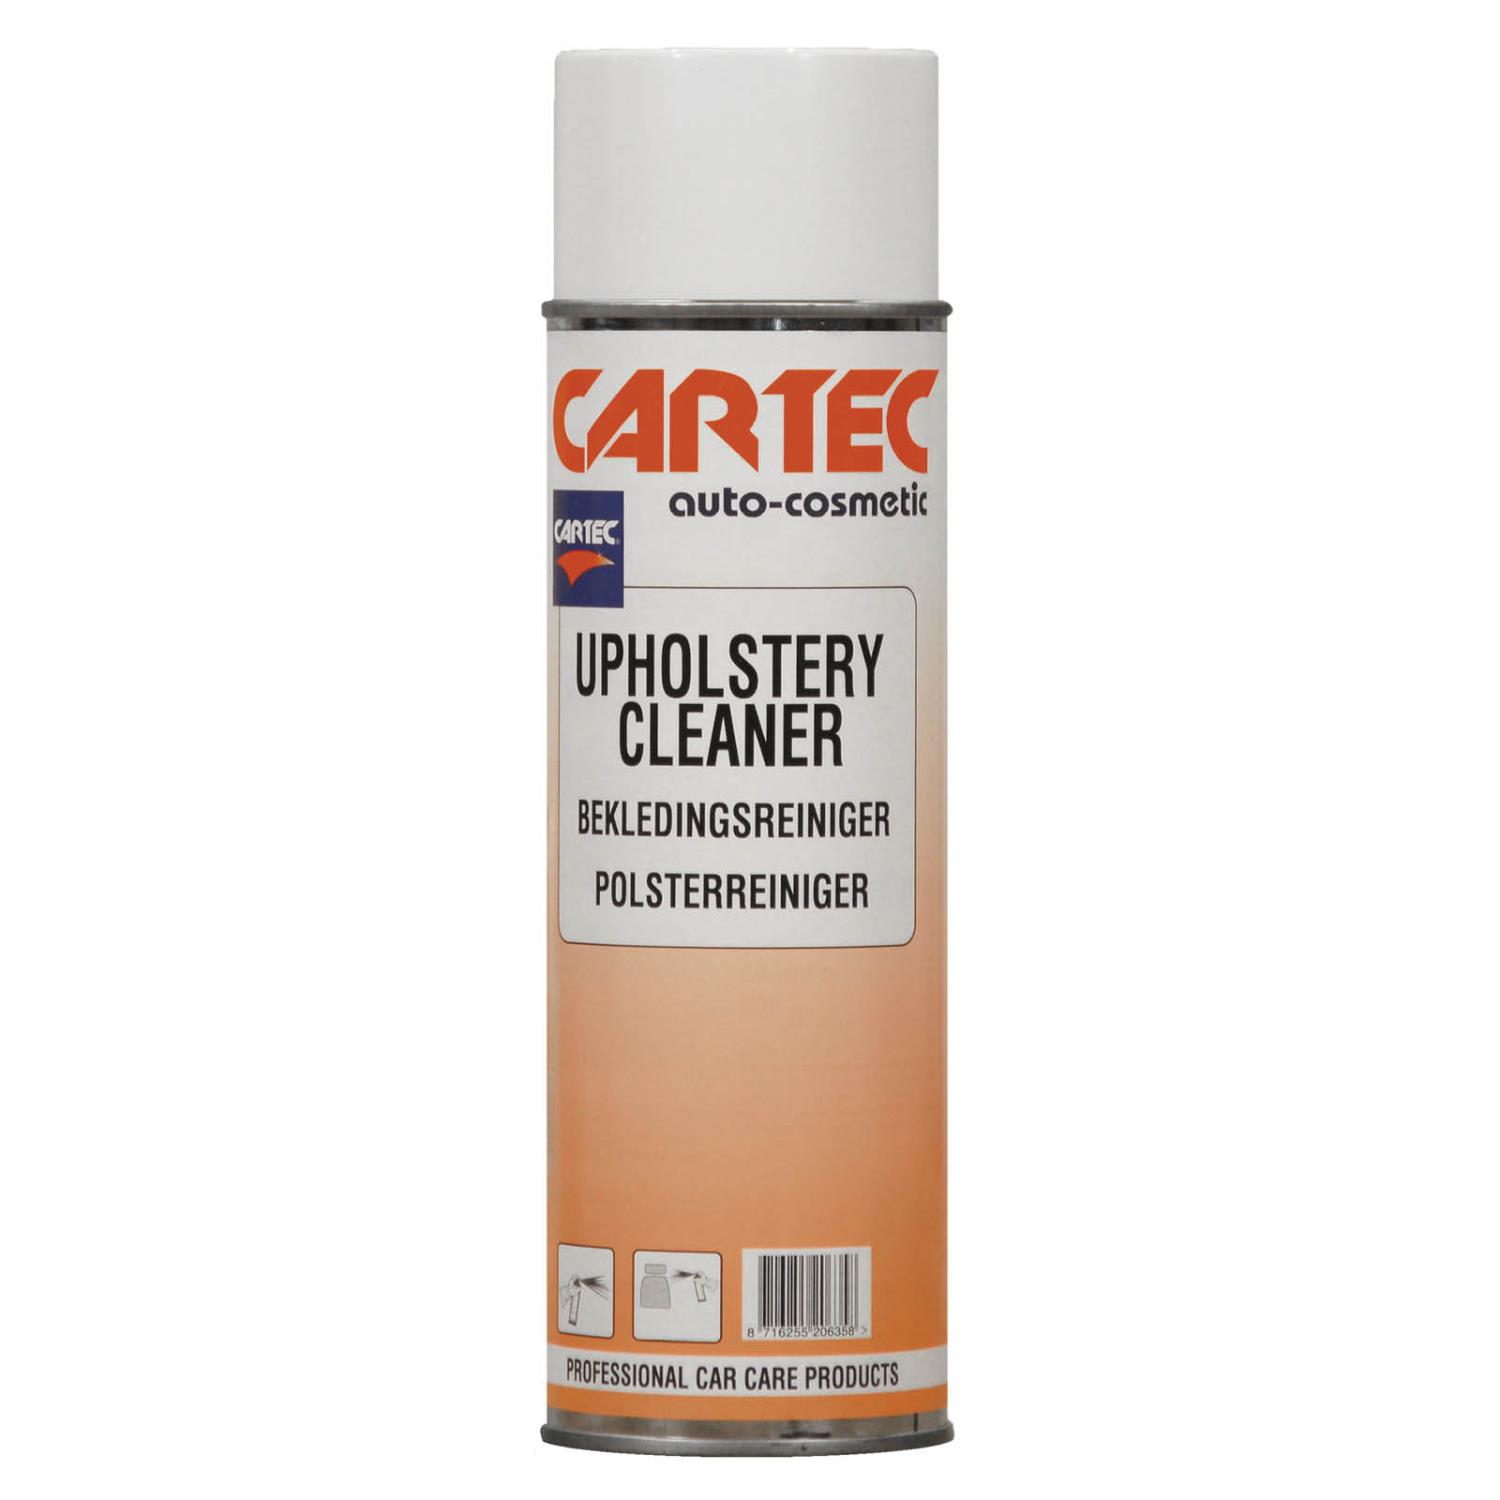 Cartec Upholstery Cleaner 0,5 Ltr.